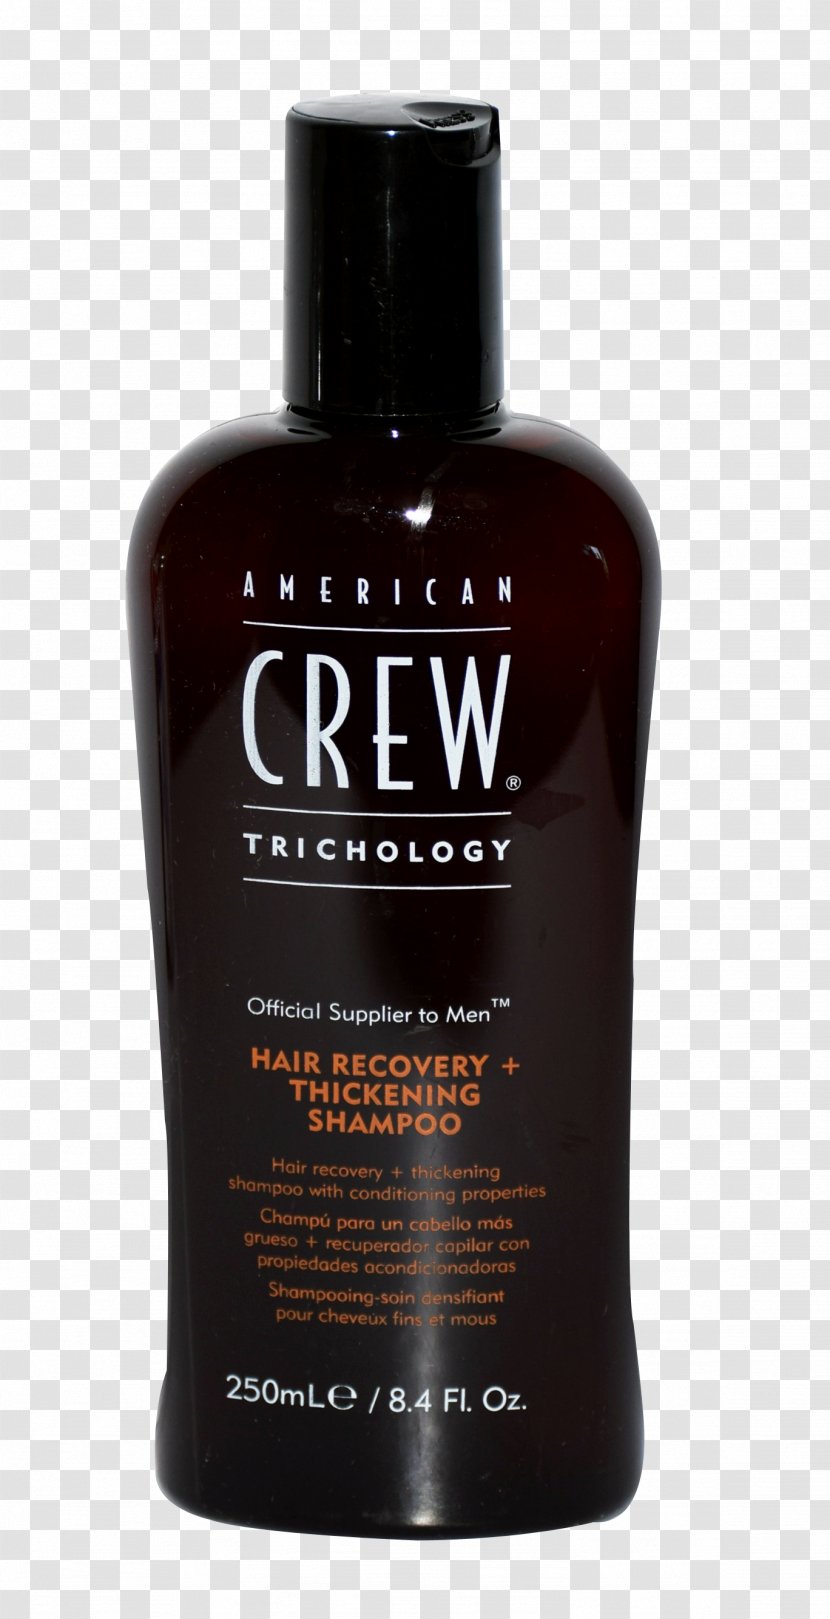 American Crew 3-IN-1 Daily Moisturizing Shampoo Hair Conditioner - Tea Tree Oil Transparent PNG